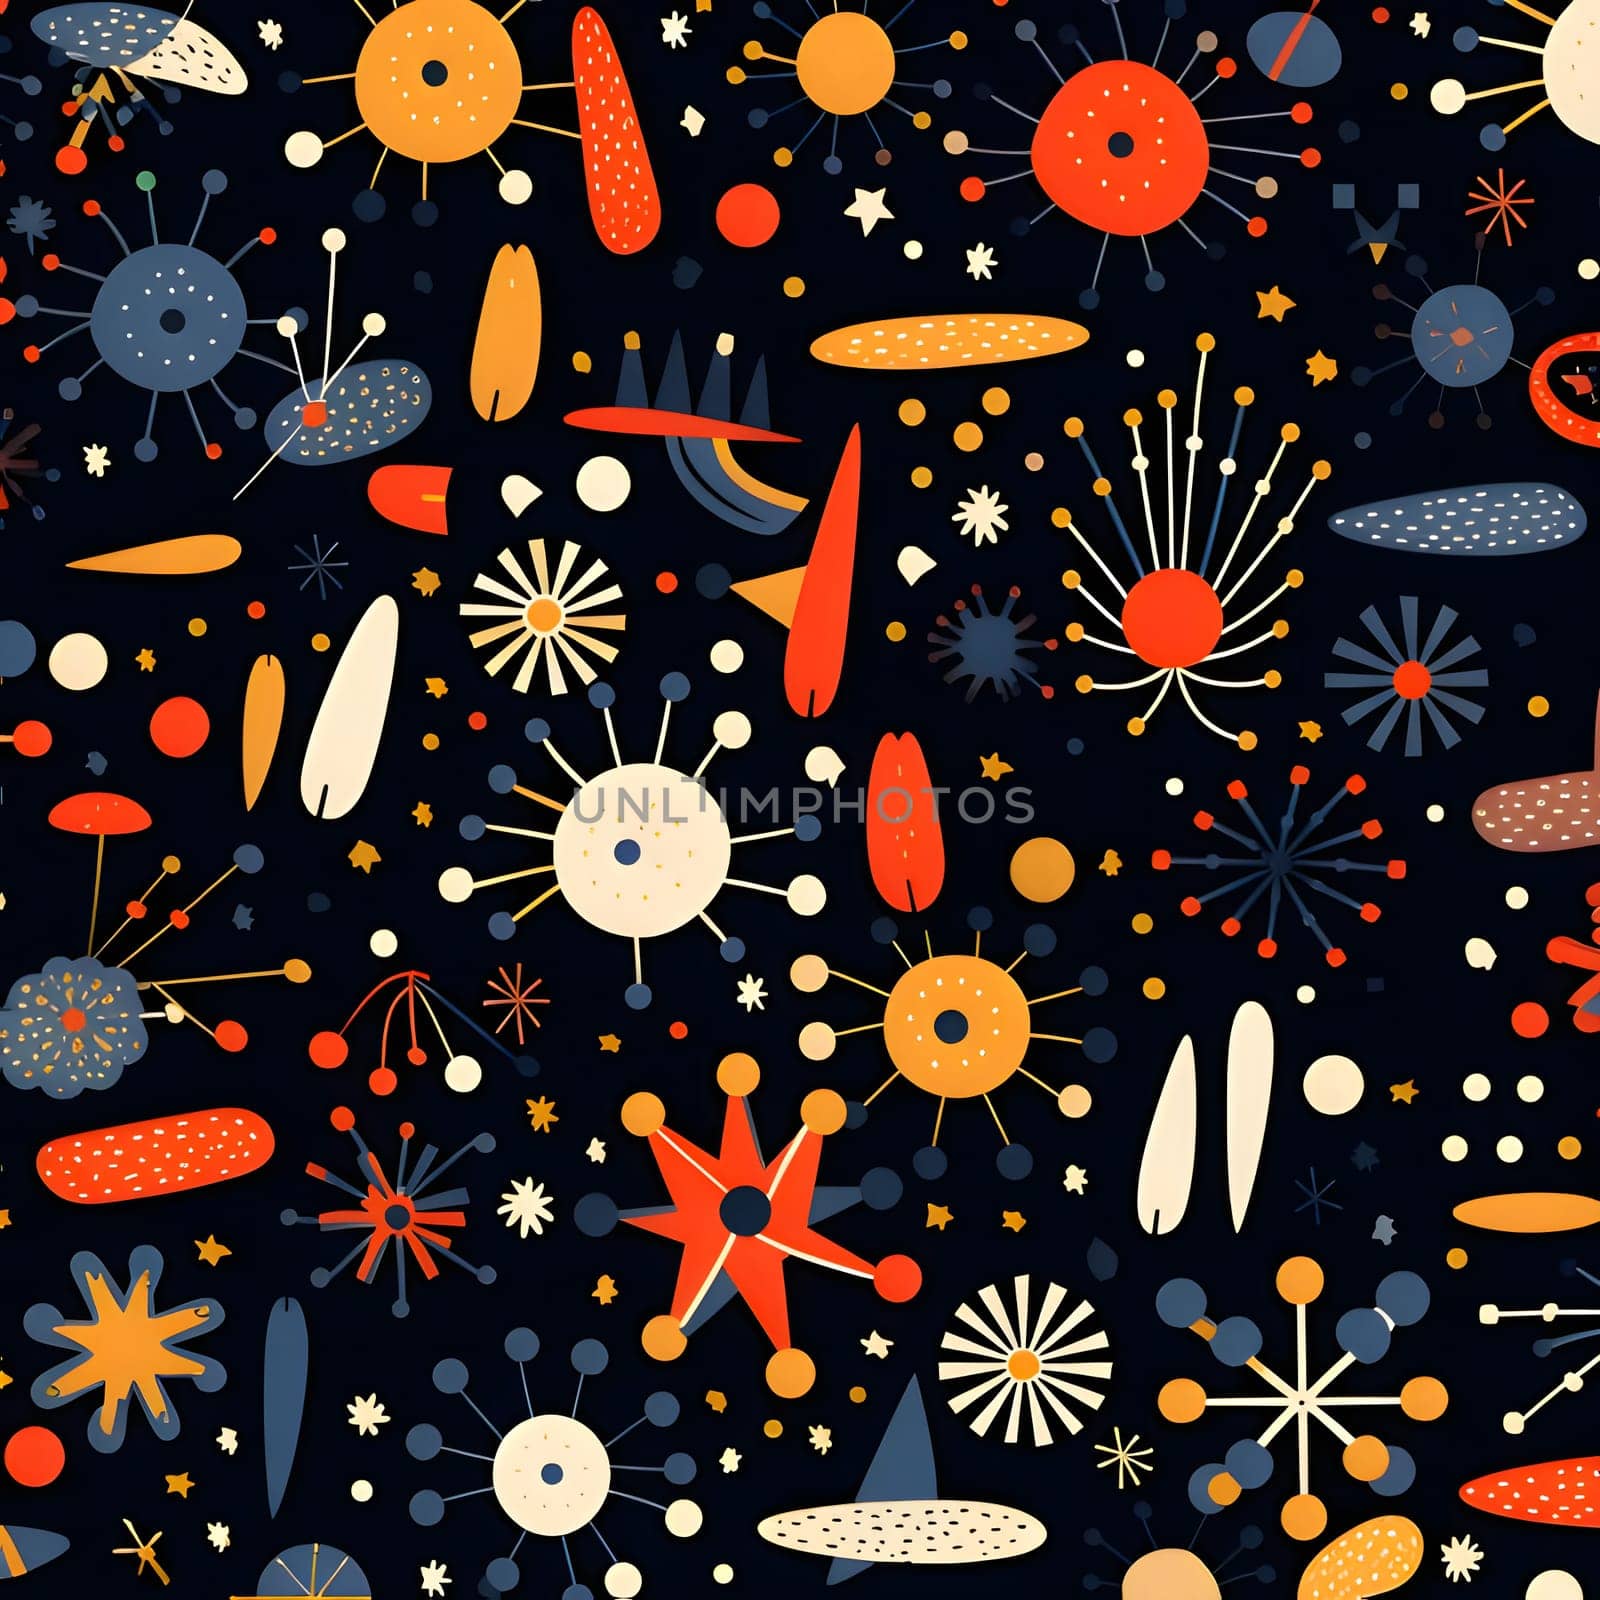 Patterns and banners backgrounds: Seamless pattern with hand drawn planets and stars. Vector illustration.